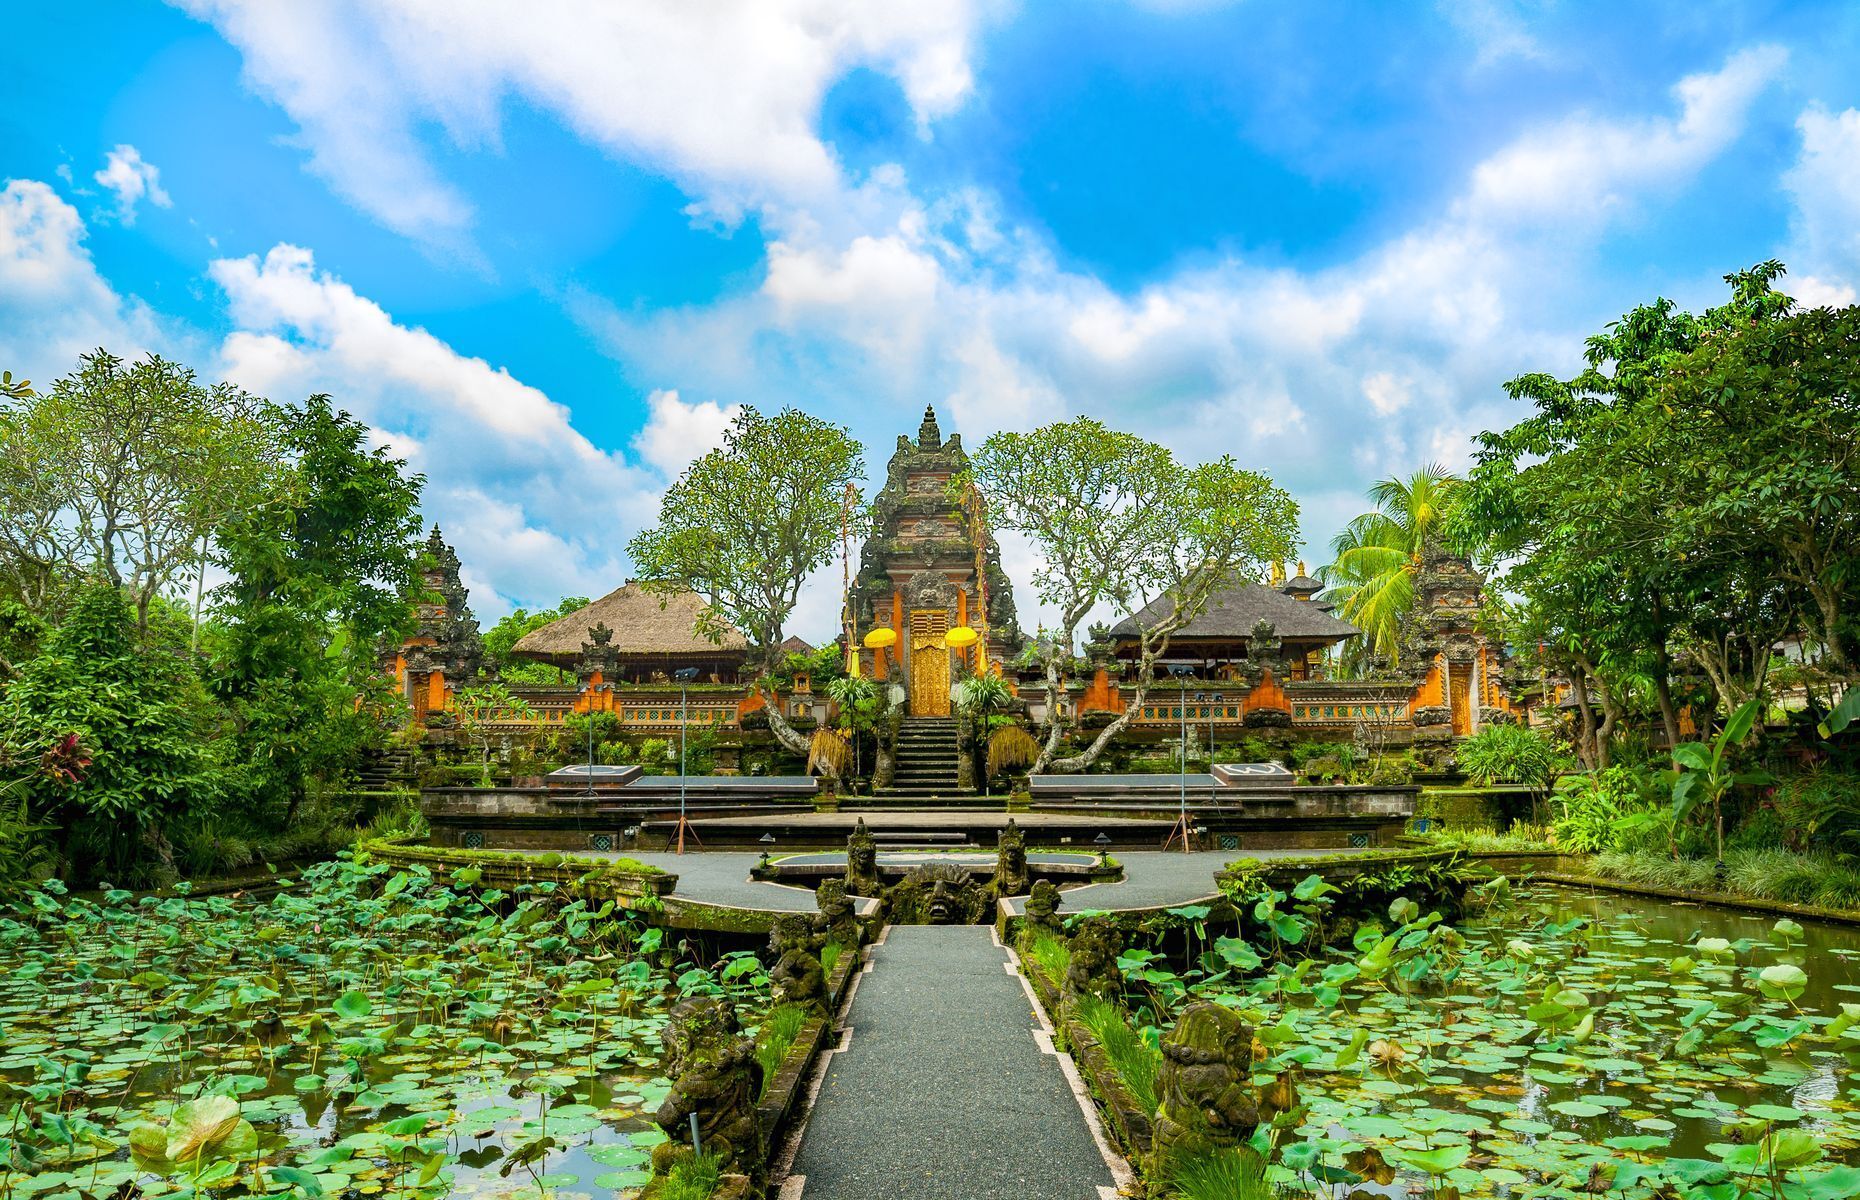 <p>Nestled in the heart of the Indonesian island of Bali, <a href="https://theworldtravelguy.com/best-things-to-do-in-ubud-bali-monkeys-temples-markets/" class="atom_link atom_valid" rel="noreferrer noopener">Ubud</a> is a cultural and natural haven of peace. From the lush rice terraces of Tegallalang and legendary Saraswati temple to the <a href="https://monkeyforestubud.com/" class="atom_link atom_valid" rel="noreferrer noopener">Monkey Forest</a> in the heart of the city, there’s no shortage of interesting things to do. Art enthusiasts will be especially delighted as Ubud’s renowned galleries, craft studios, and market offer superb local creations. This tranquil town is also ideal for yoga retreats and Balinese cooking classes.</p>